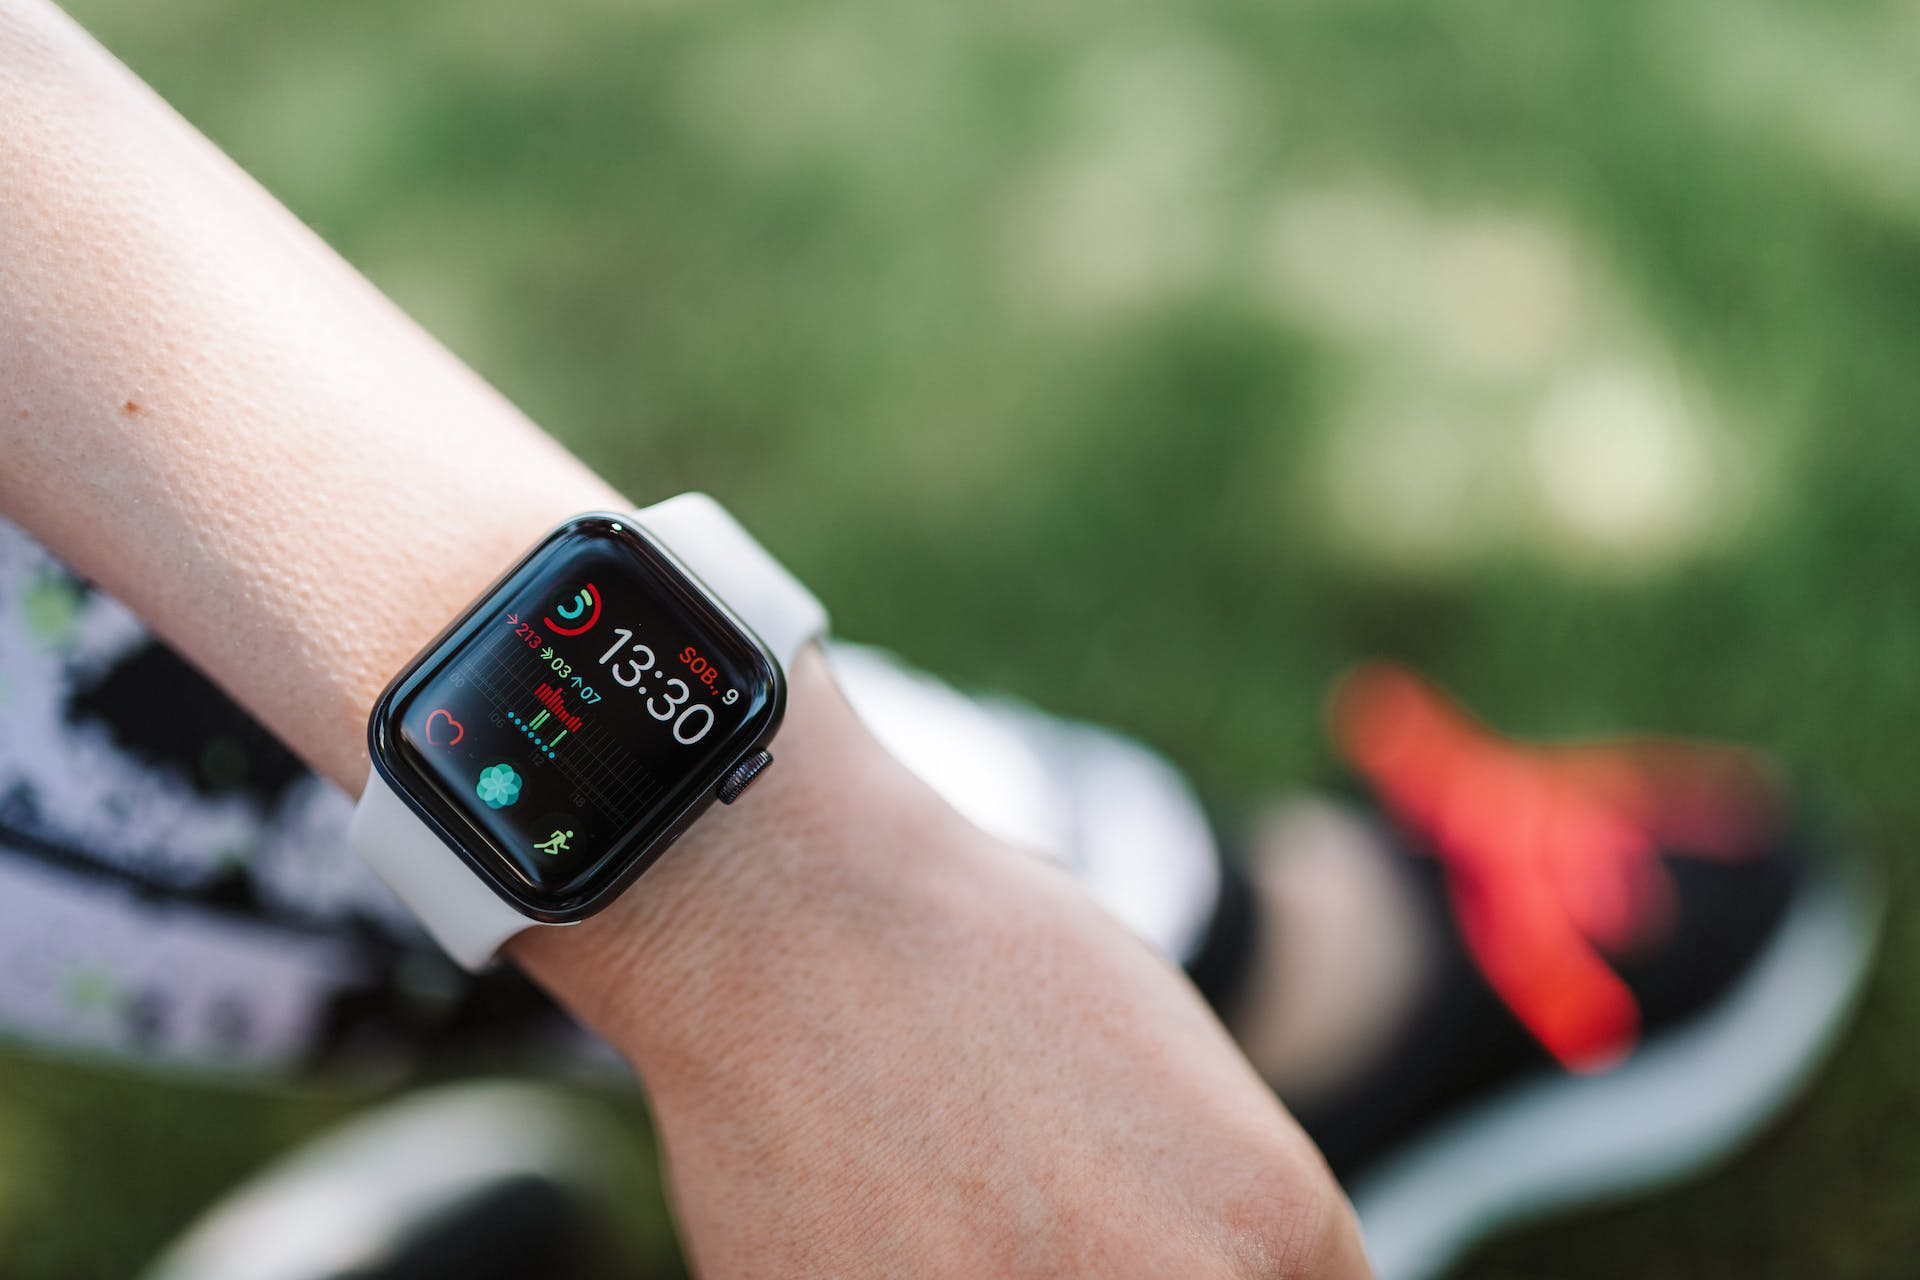 How Apple Watch can Help Monitor Your Blood Pressure and Improve Your Health